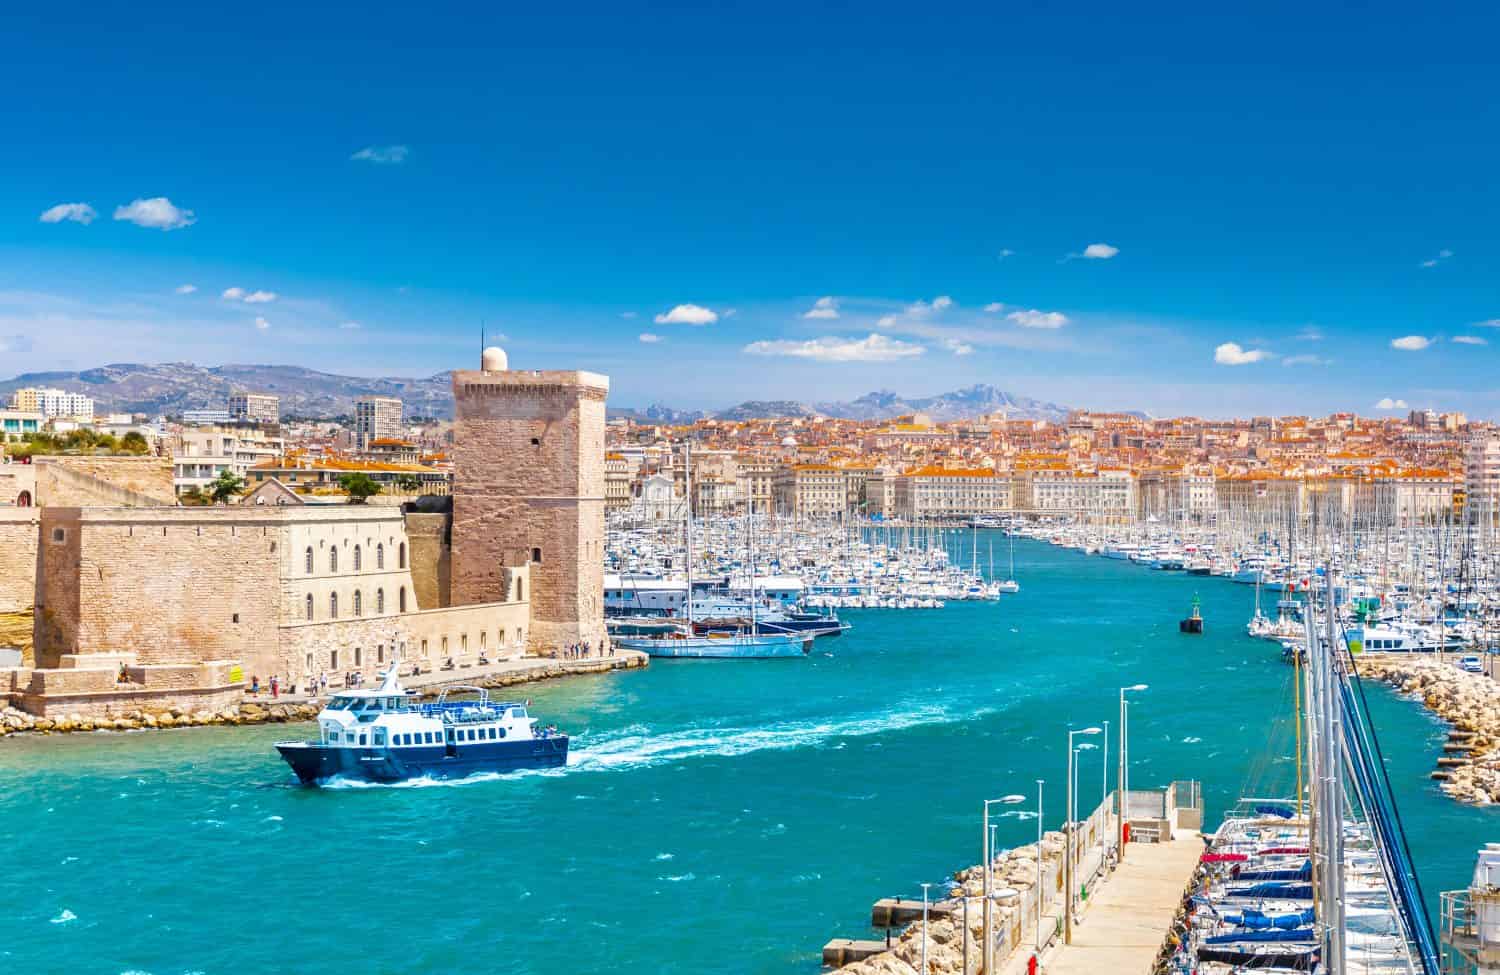 Aerial panoramic view of Marseille Old Port with yachts and boats and the city, mountains in the background. Marseille, Provence, France. Holidays in France